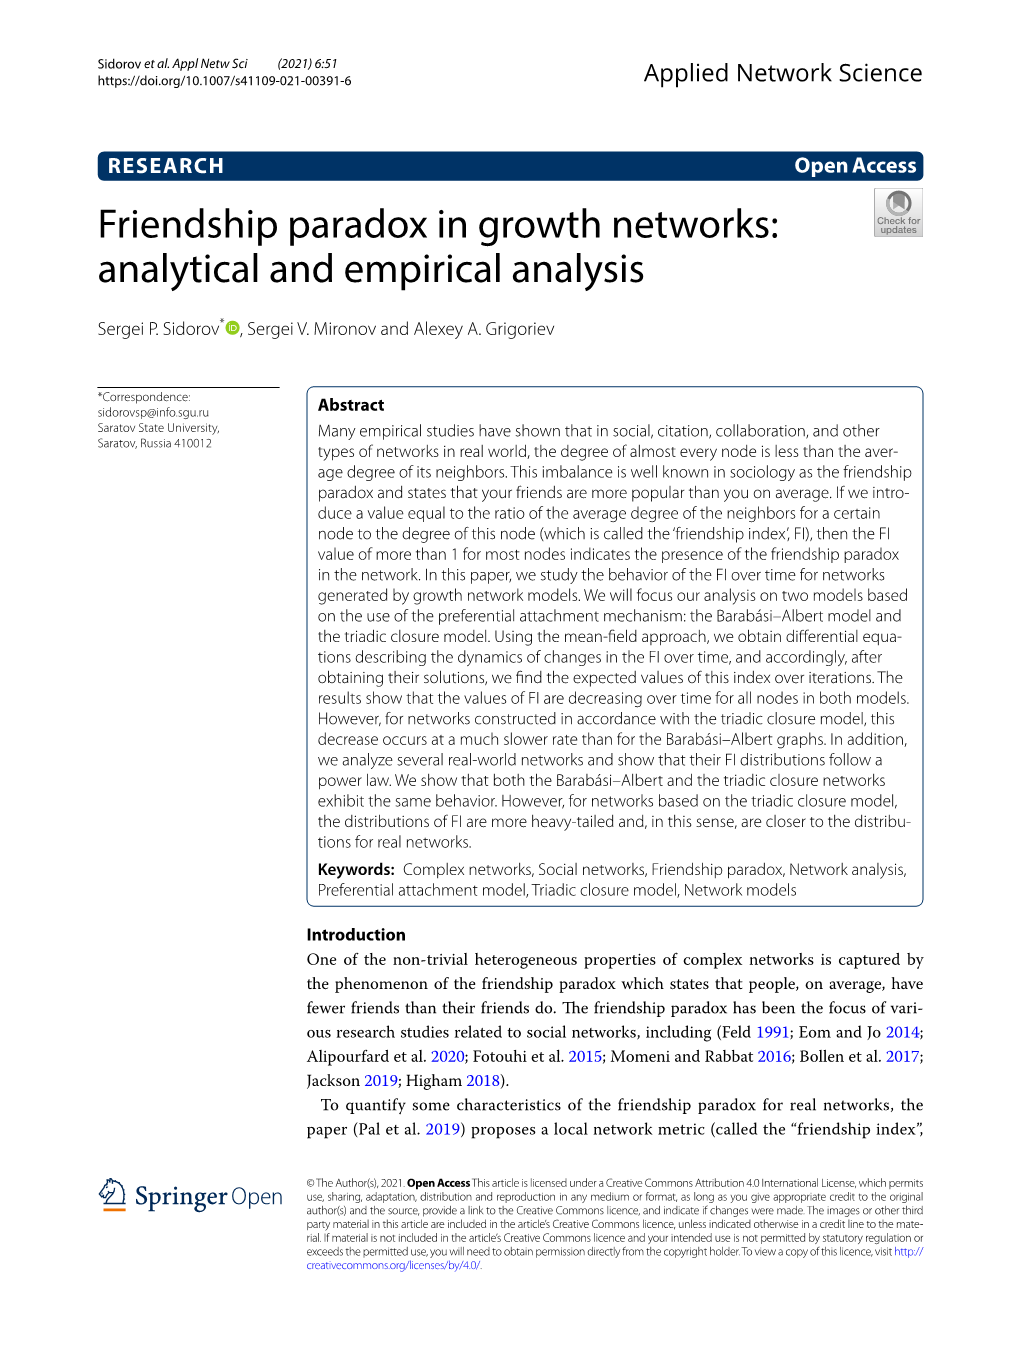 Friendship Paradox in Growth Networks: Analytical and Empirical Analysis